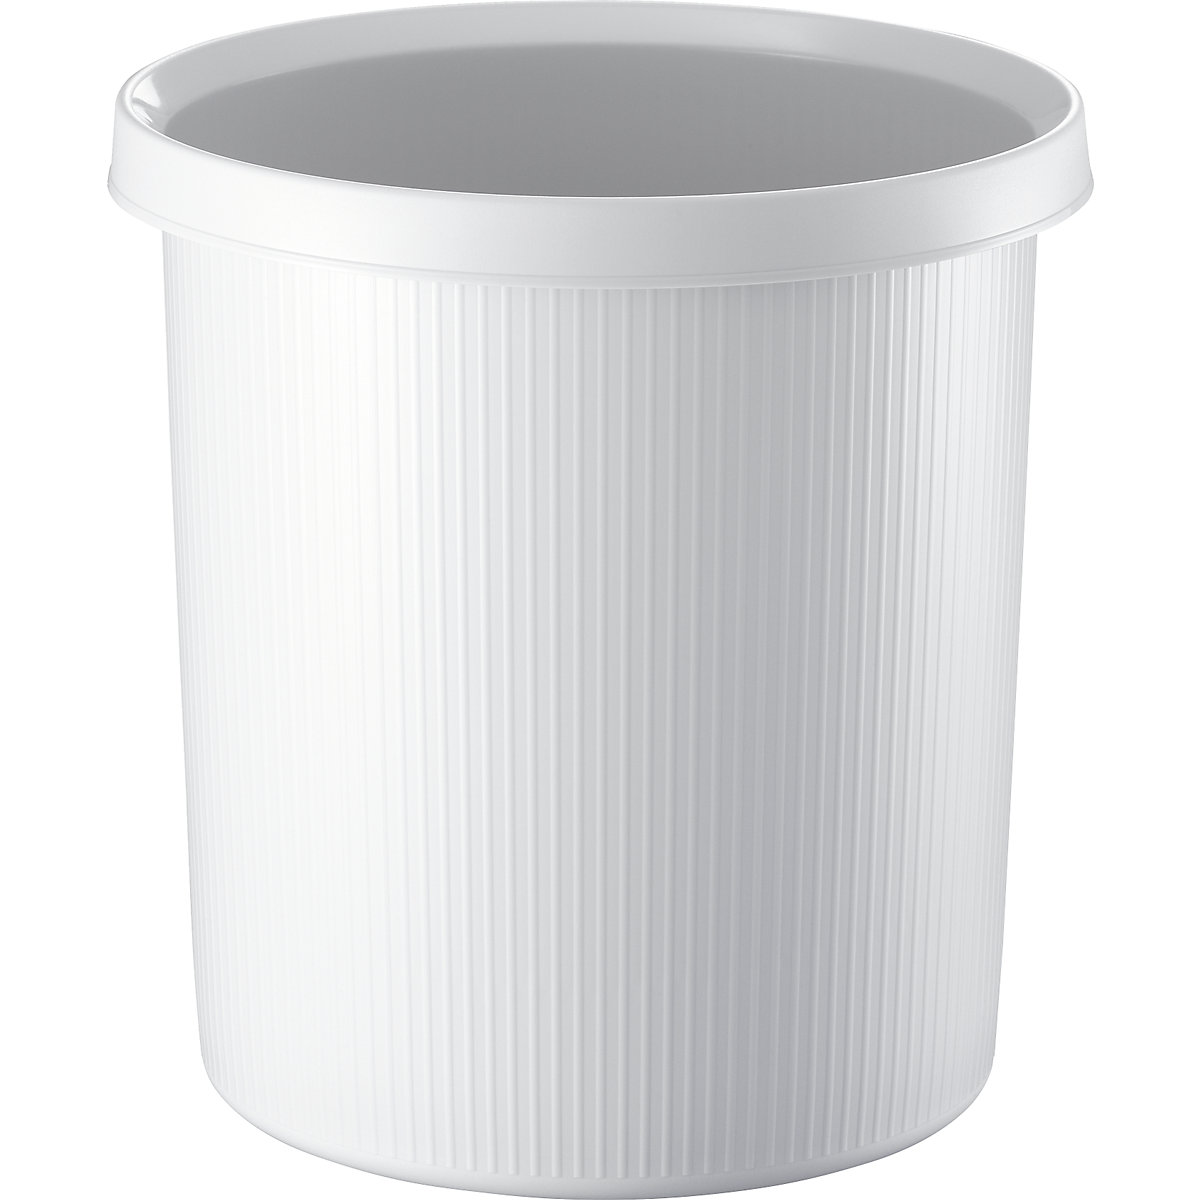 Plastic waste paper bin with stripes – helit, capacity 18 l, pack of 5, white-4